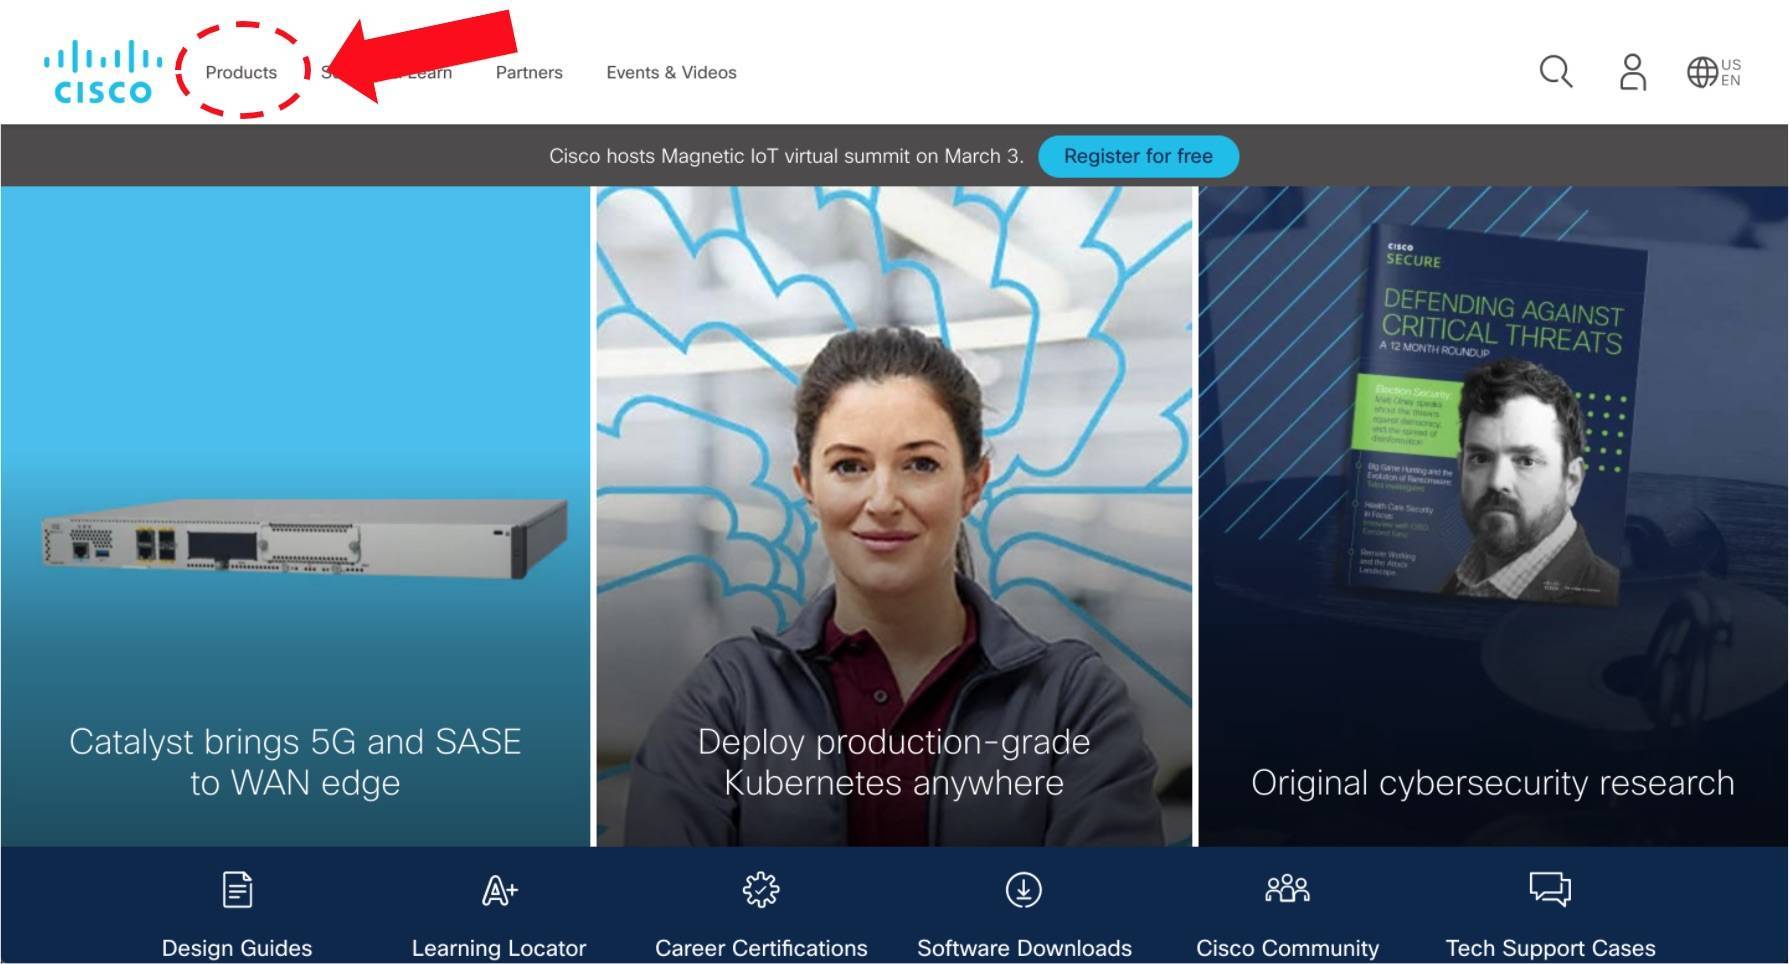 an example of the navigation menu on Cisco's website homepage